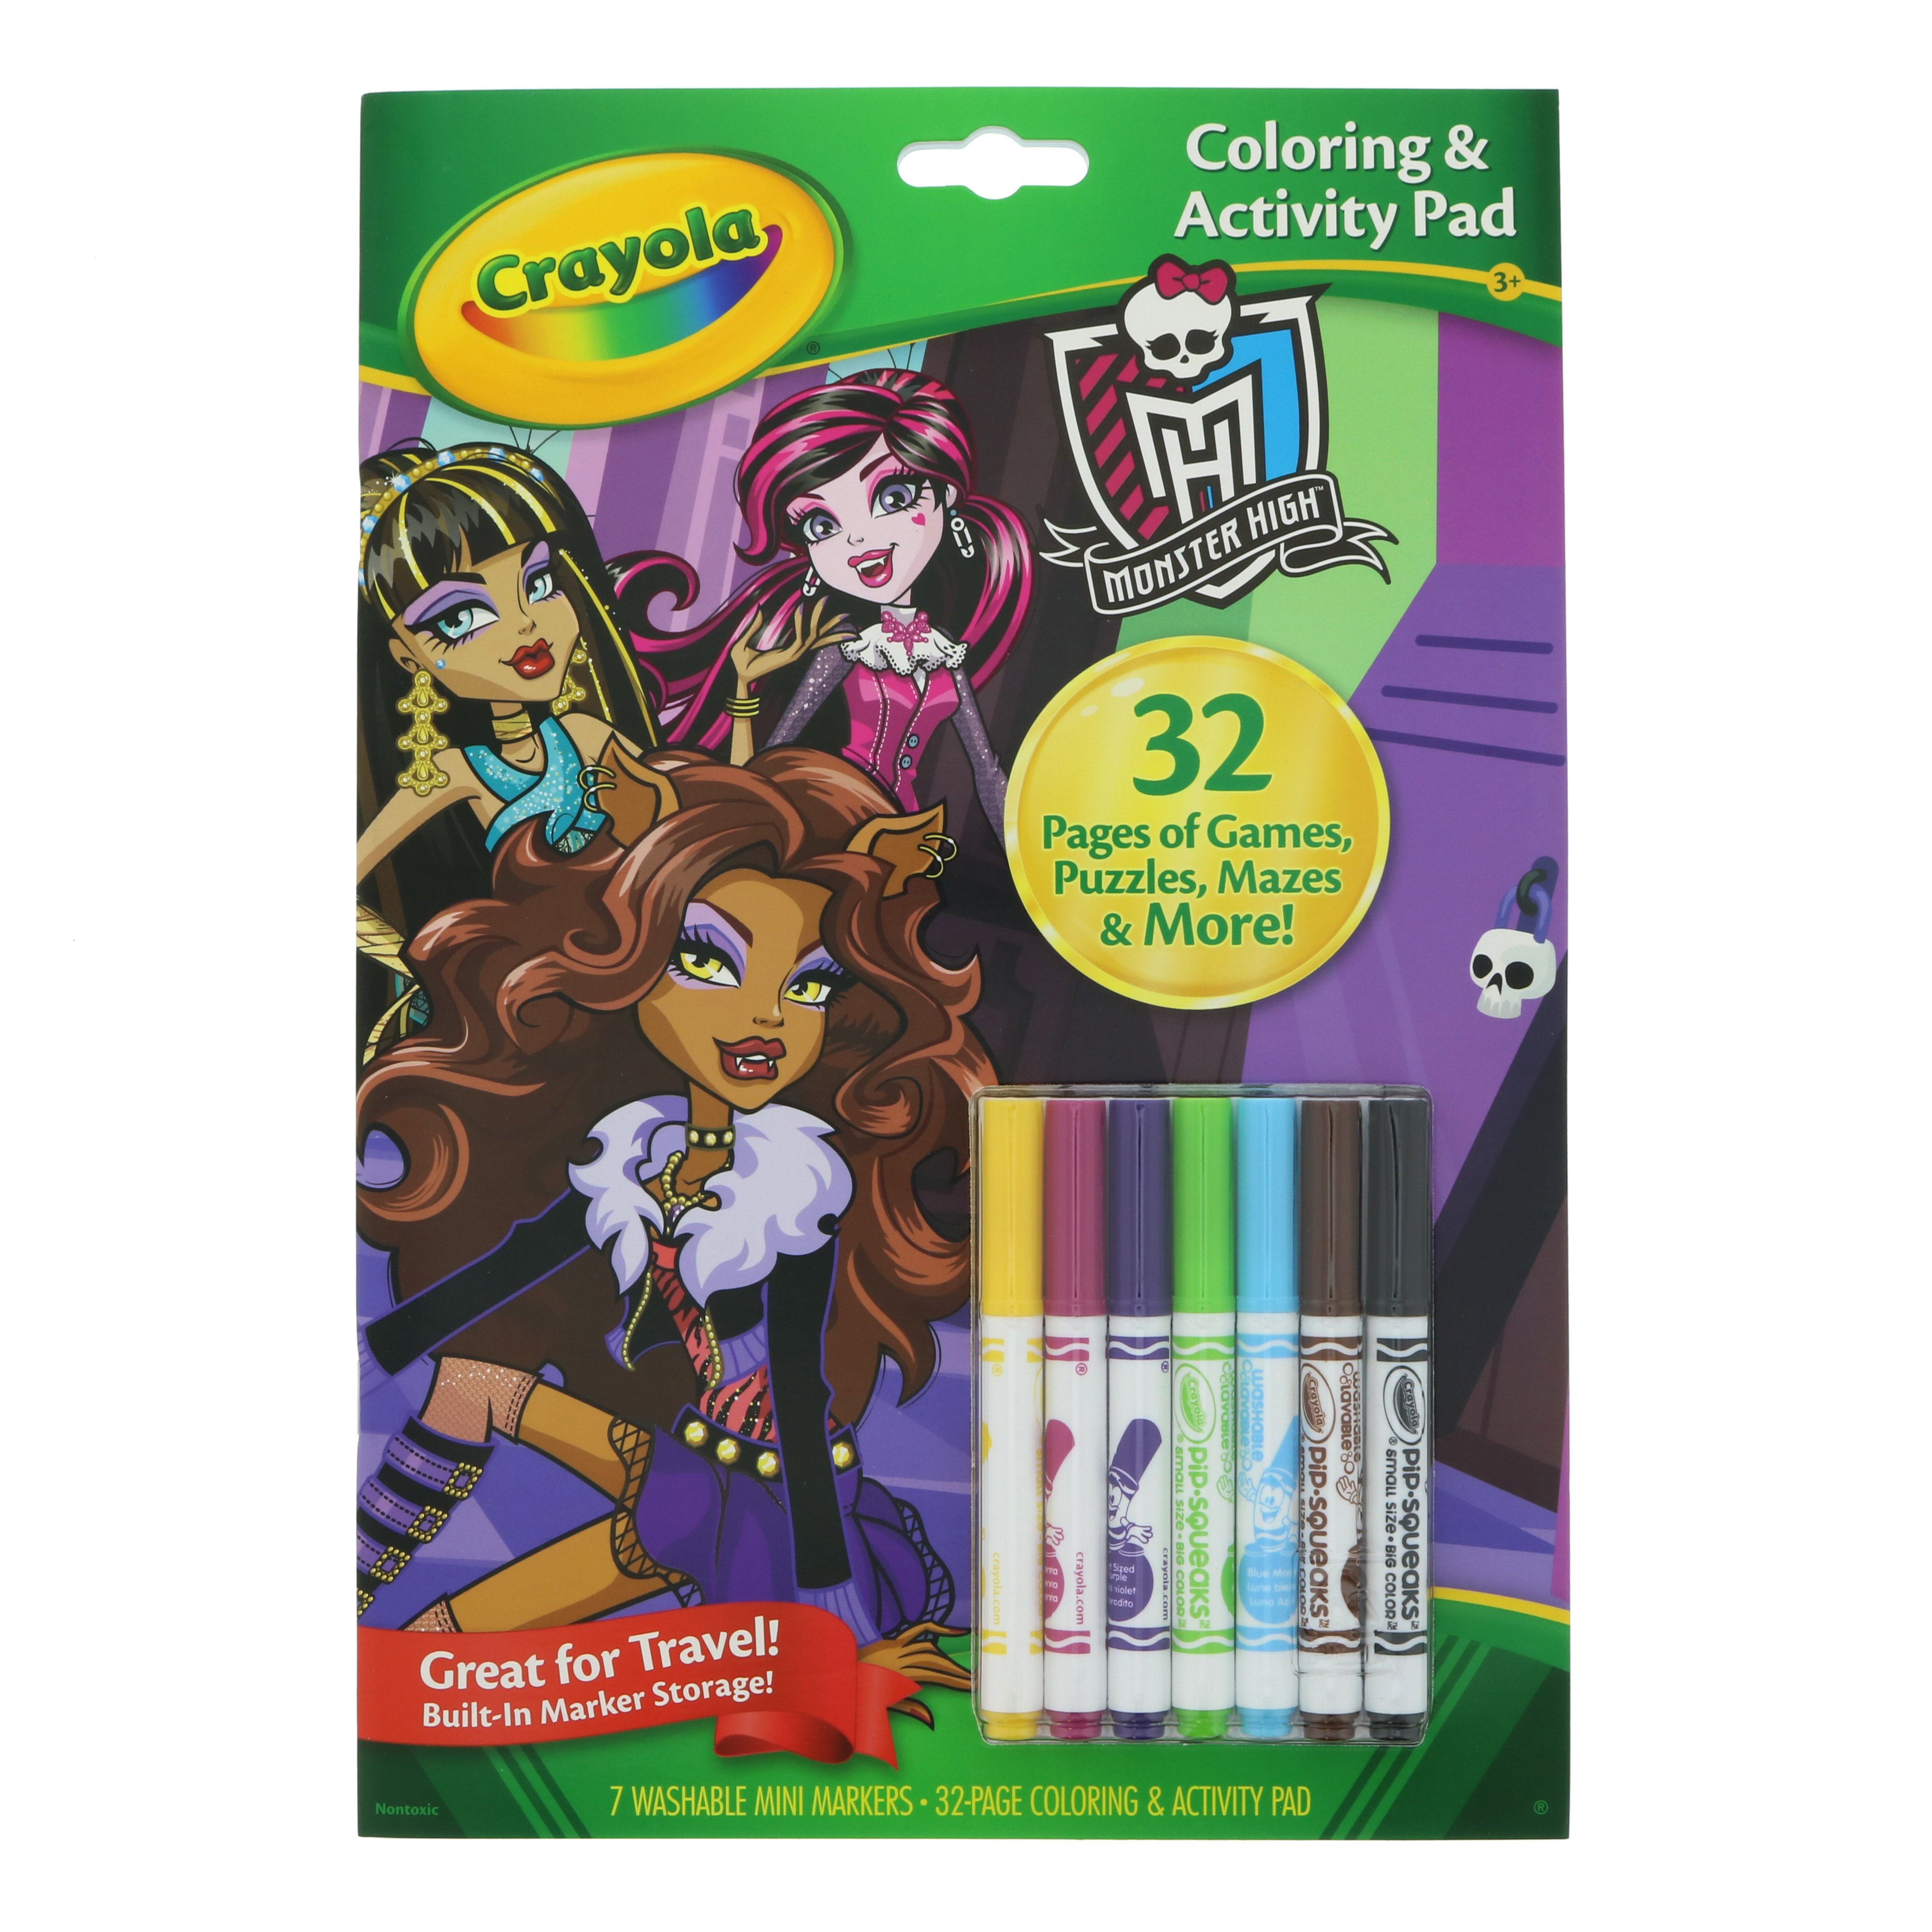 little monster high coloring pages